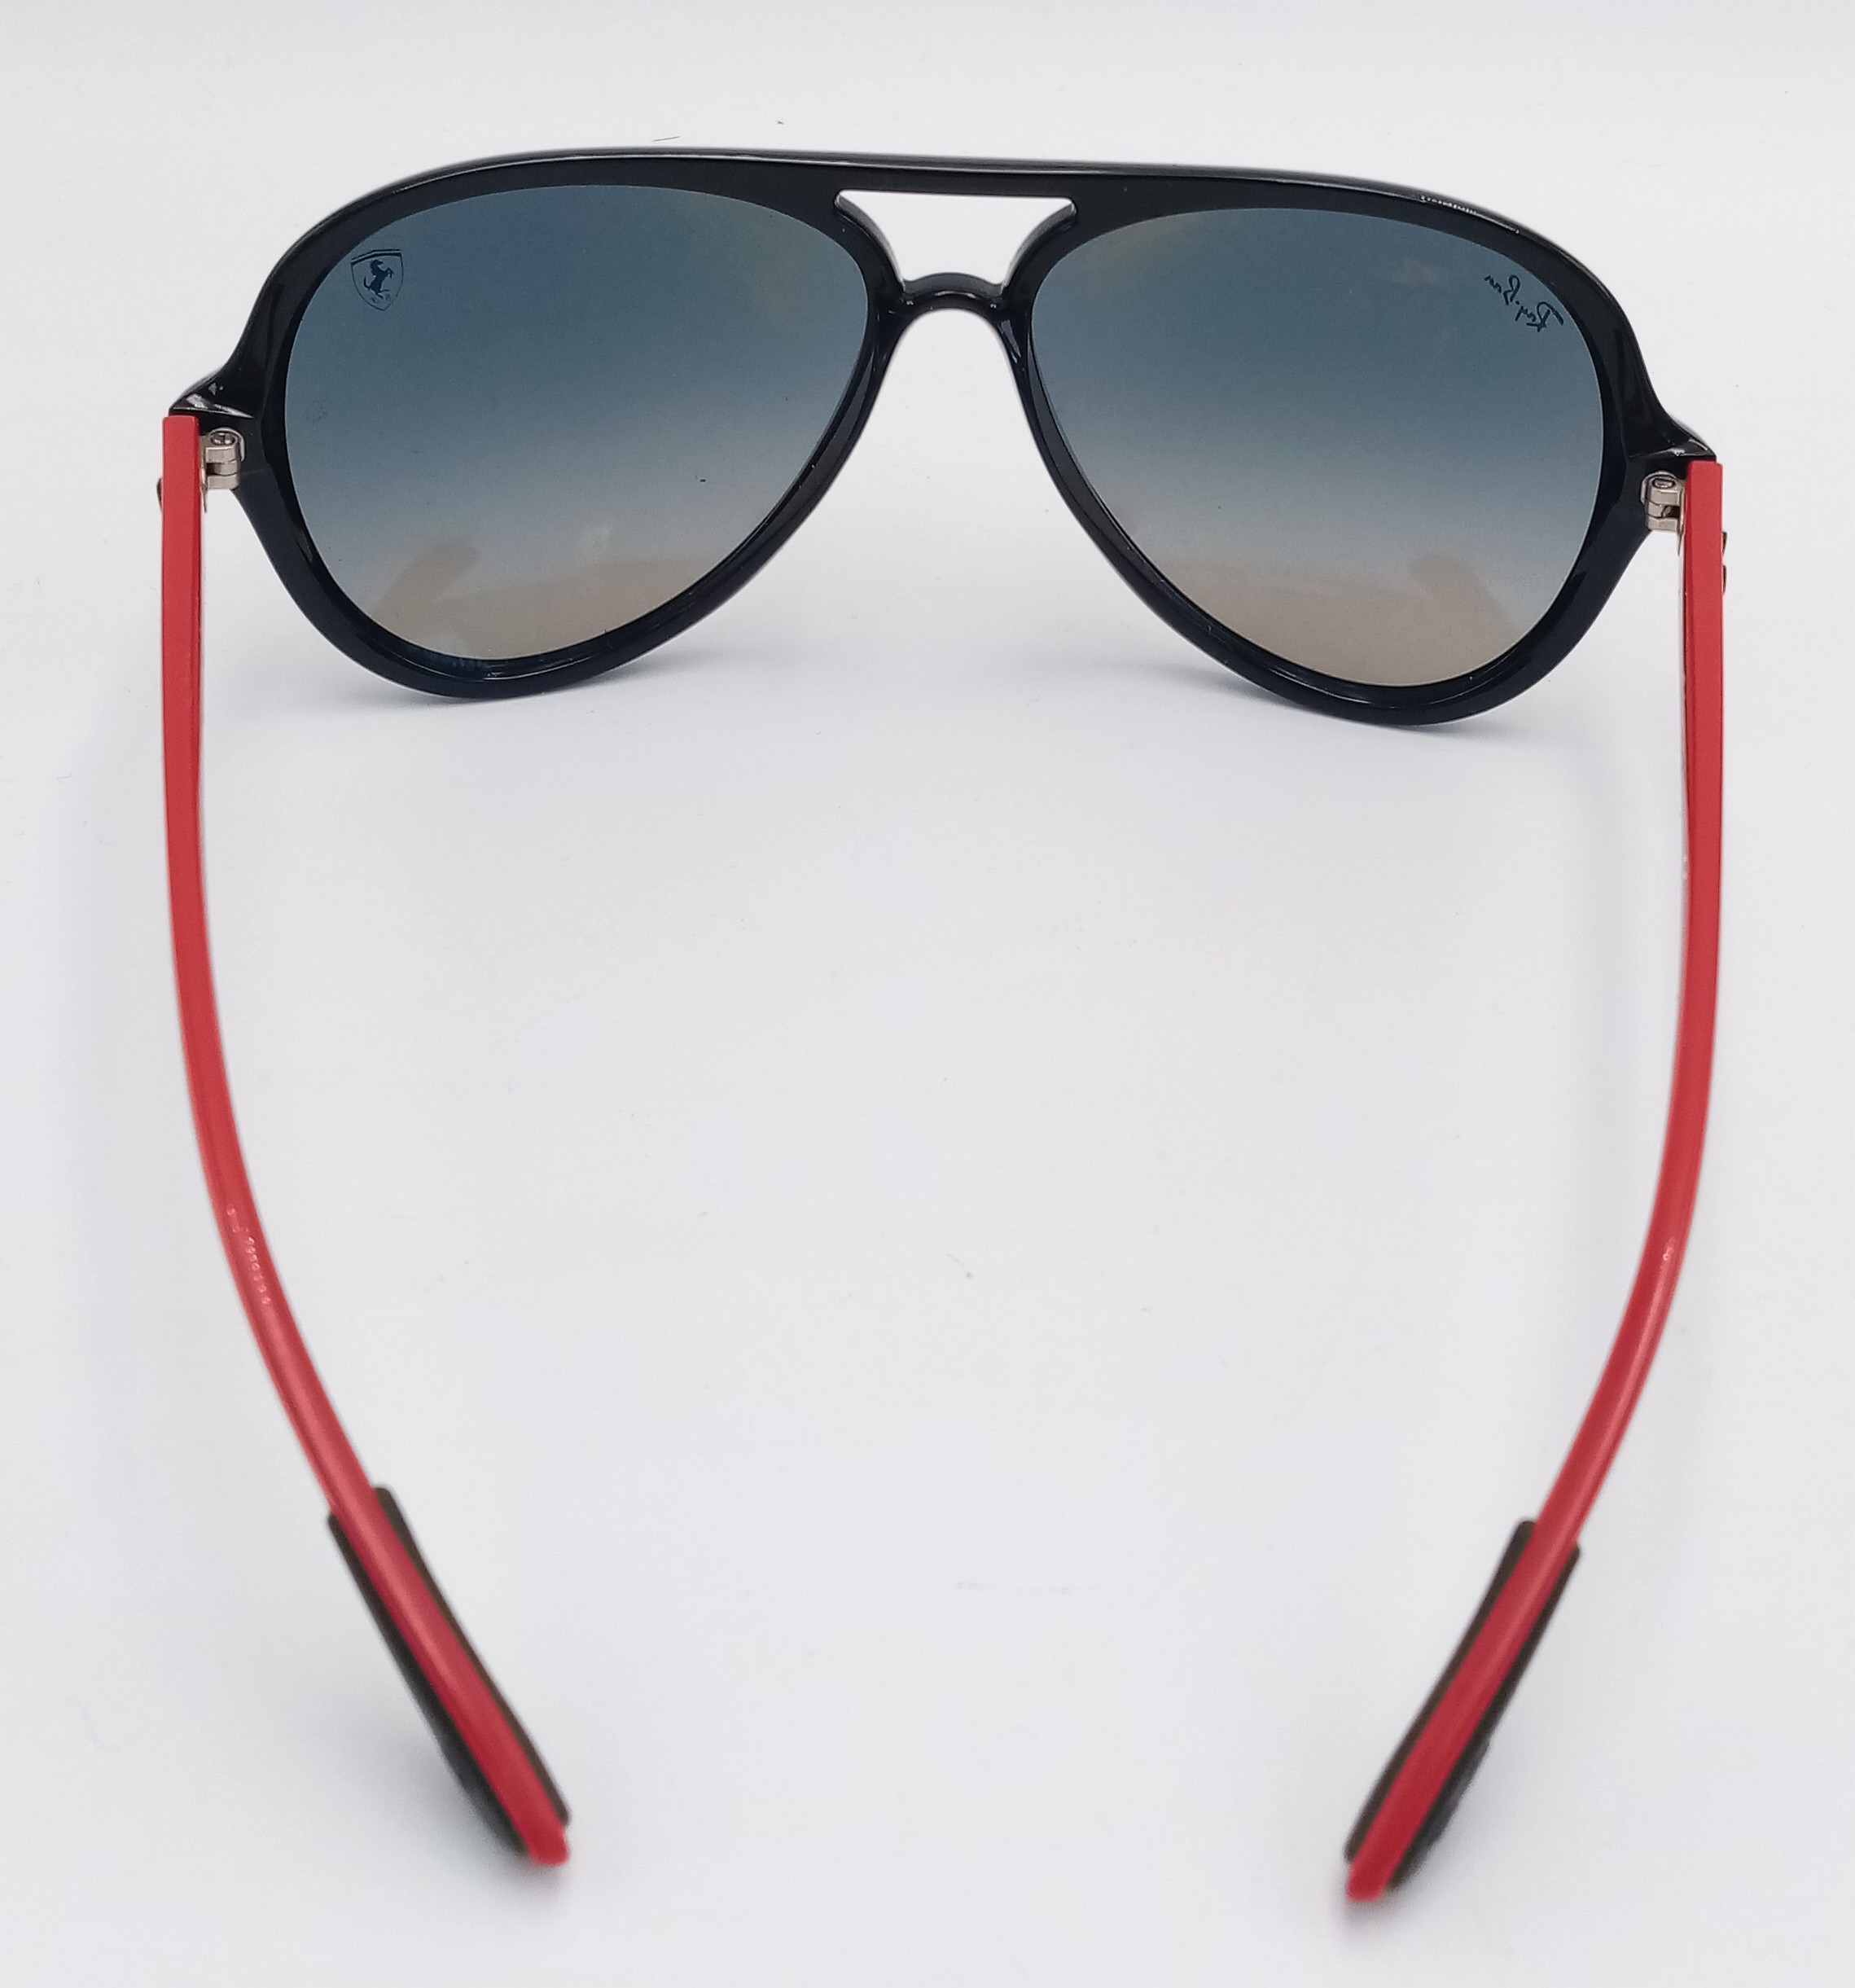 A Pair of Ray Ban Sunglasses with Case. - Image 3 of 9